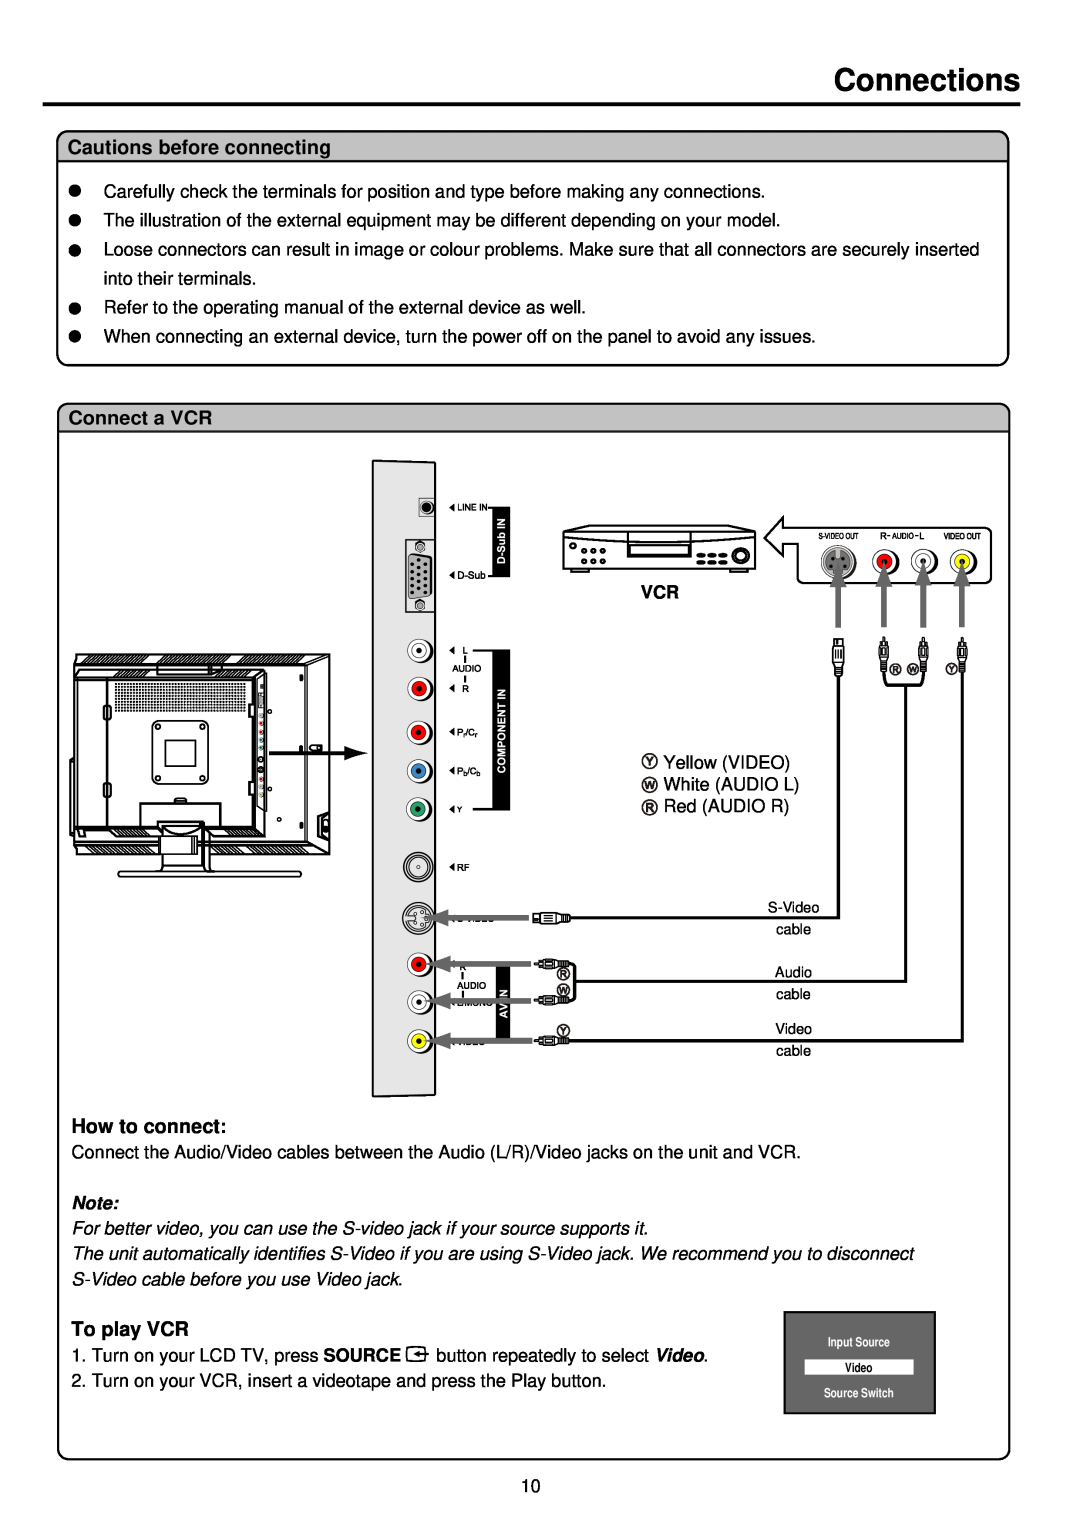 Palsonic TFTV525WS owner manual Connections, Cautions before connecting, How to connect, To play VCR, Connect a VCR 